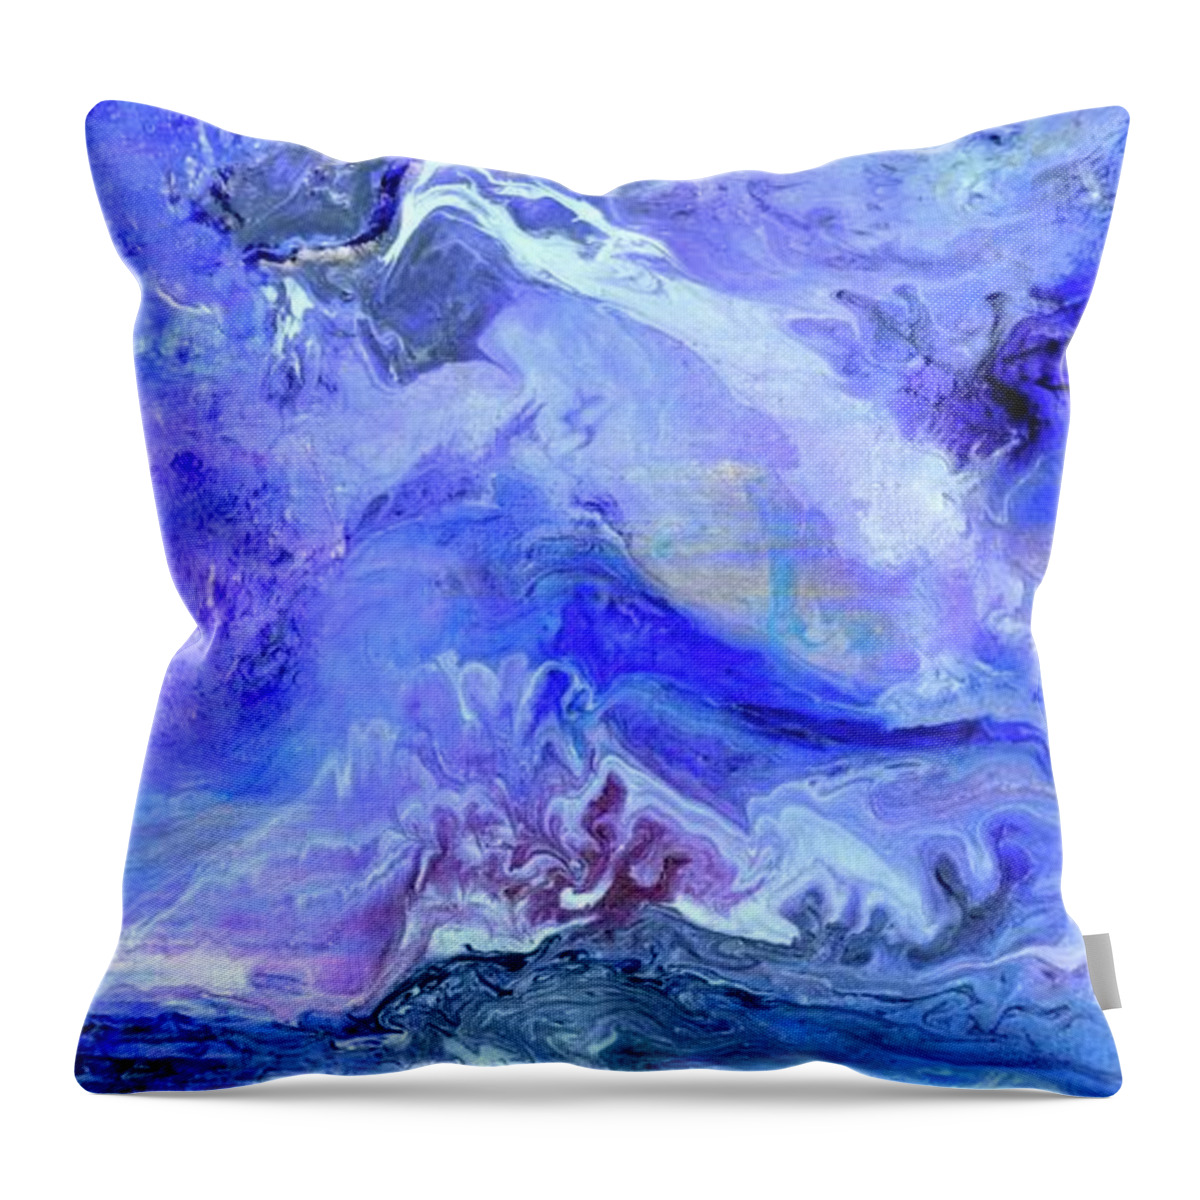 Violet Storm Throw Pillow featuring the painting Violet Storm by Debi Starr